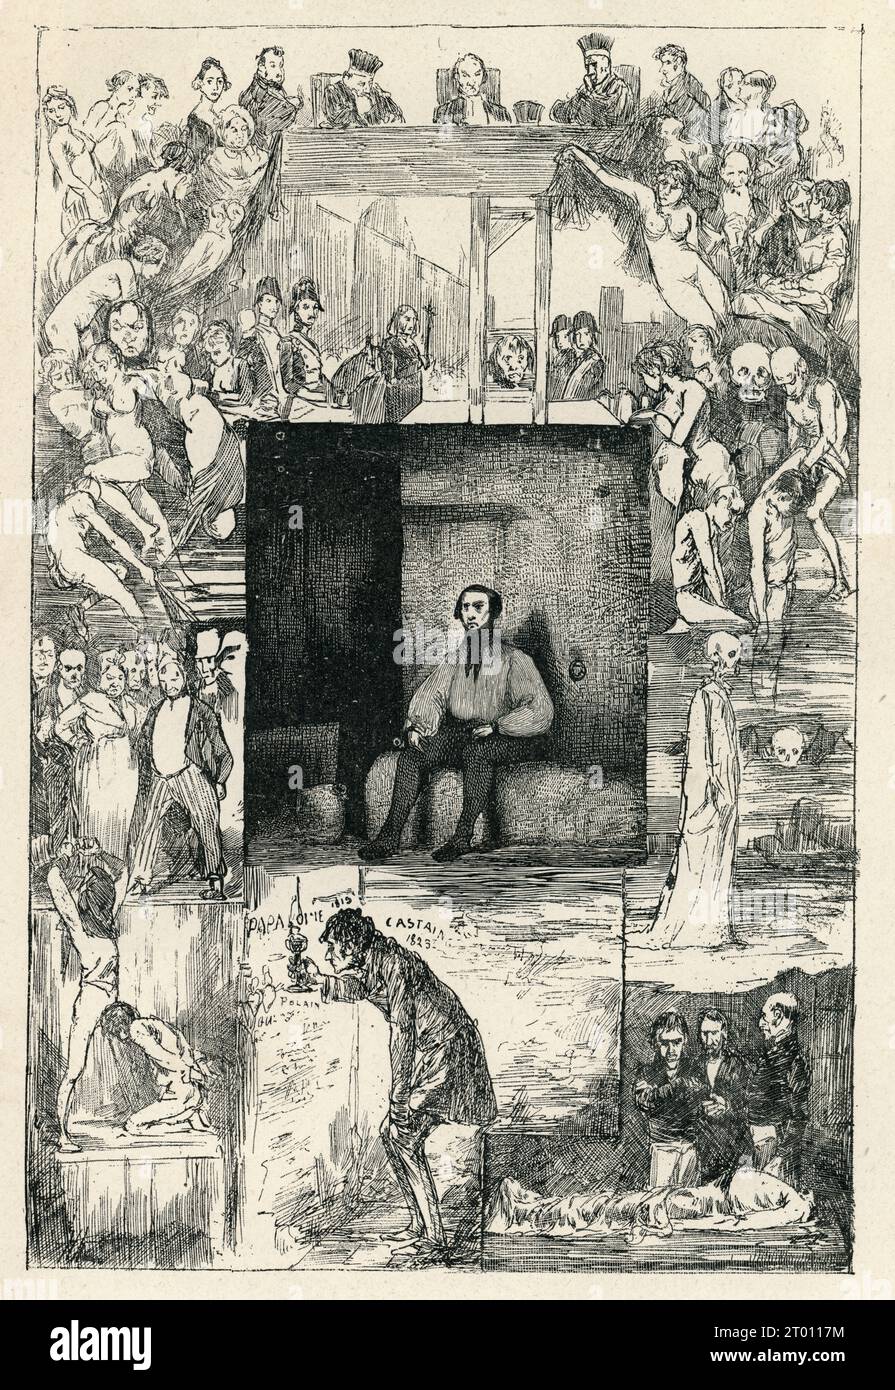 Frontispiece.  Illustrator: Célestin Nanteuil. Illustration from 'Le Dernier Jour d'un condamné' ('The Last Day of a Condemned Man', written in 1829) and part of a set of engravings published in Victor Hugo's 'Oeuvres'. Preceded by 'Napoleon le Petit', and followed by 'Claude Gueux'. Book published in French by Eugène Hugues in 1879. Stock Photo